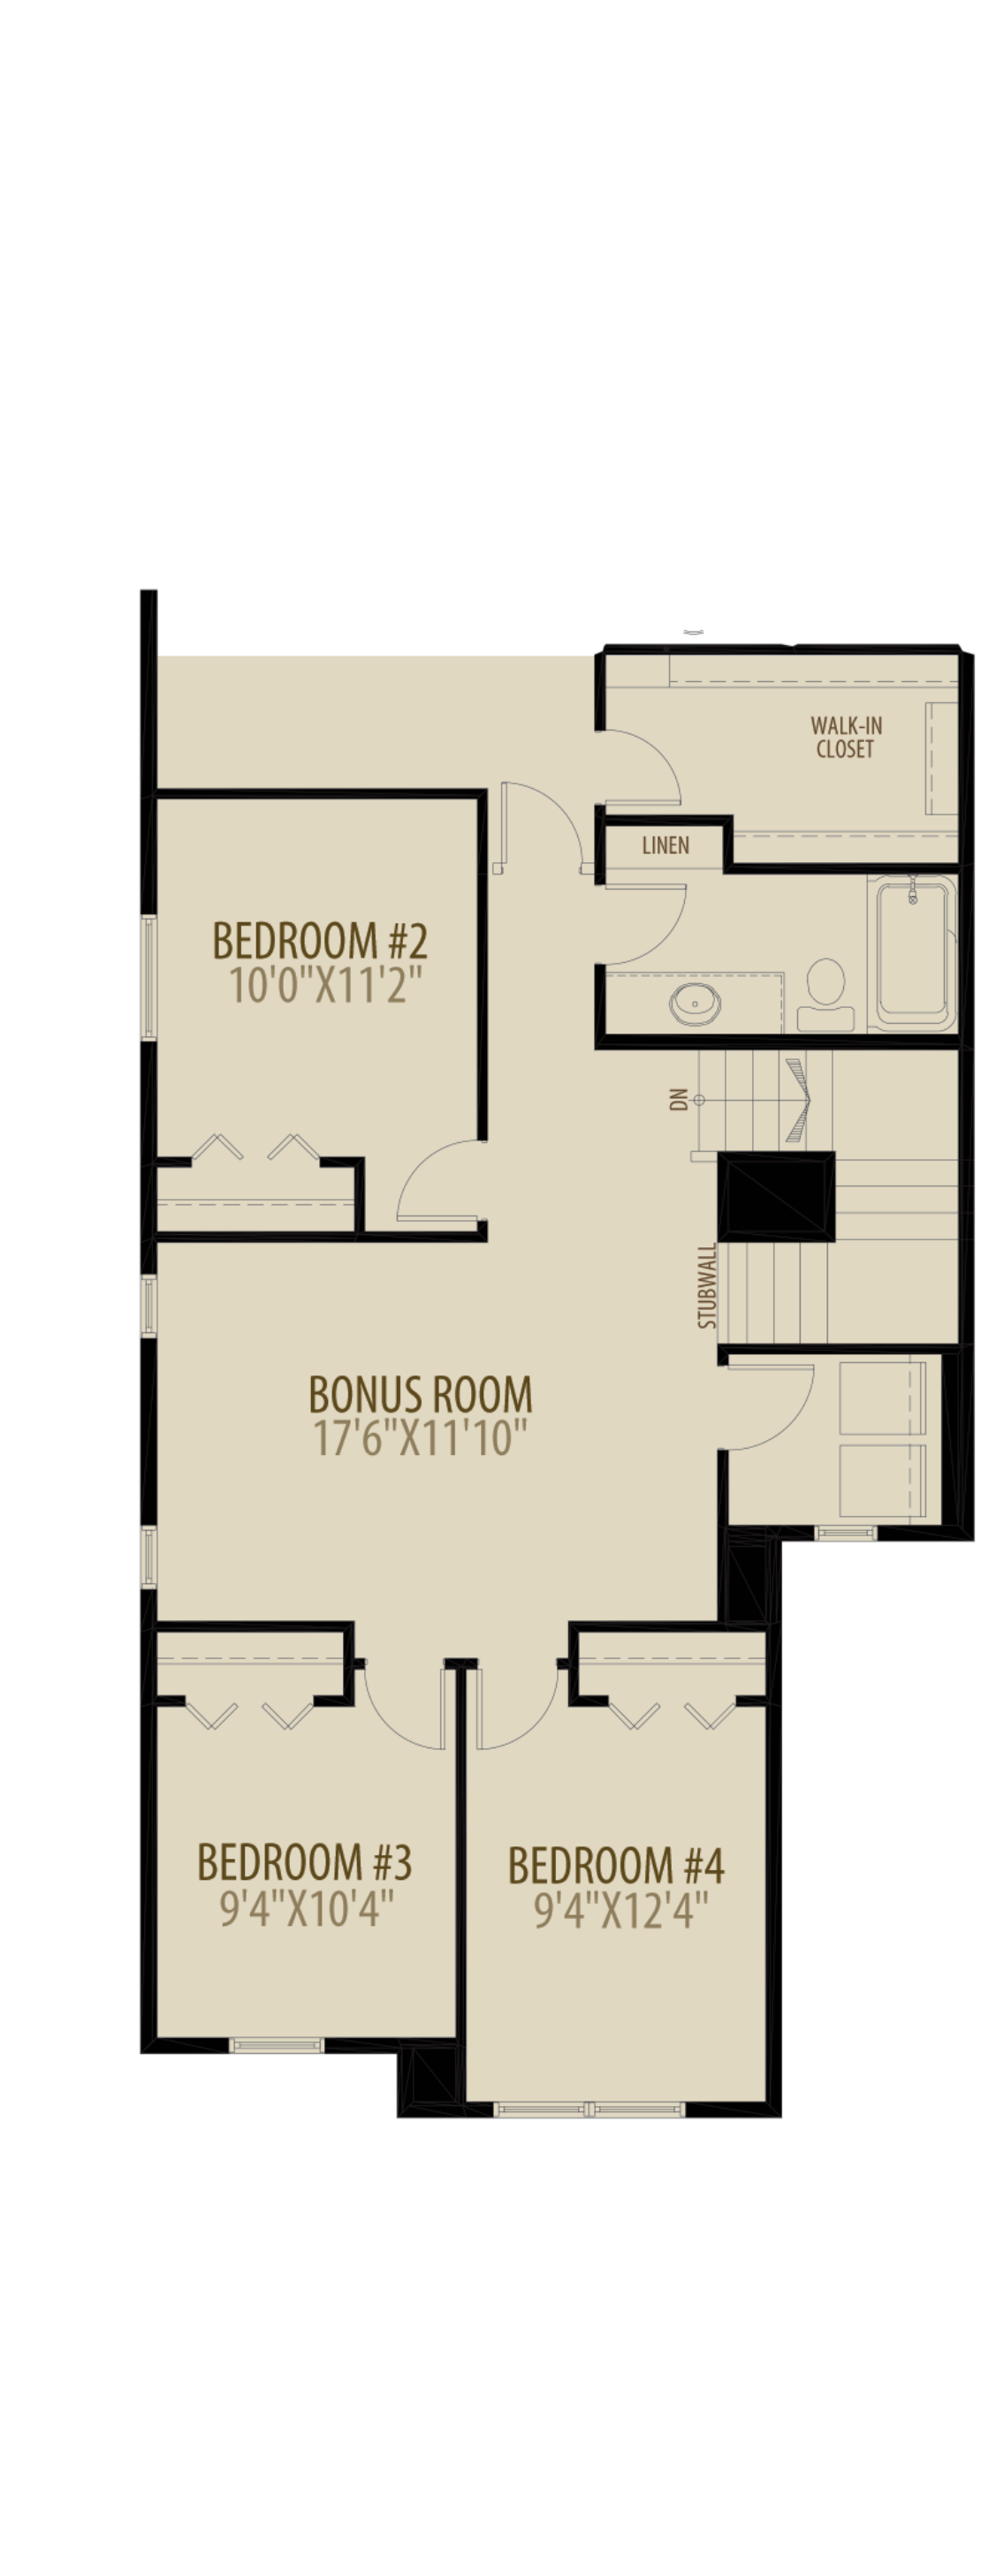 Optional 4th Bedroom Adds 104 sq ft